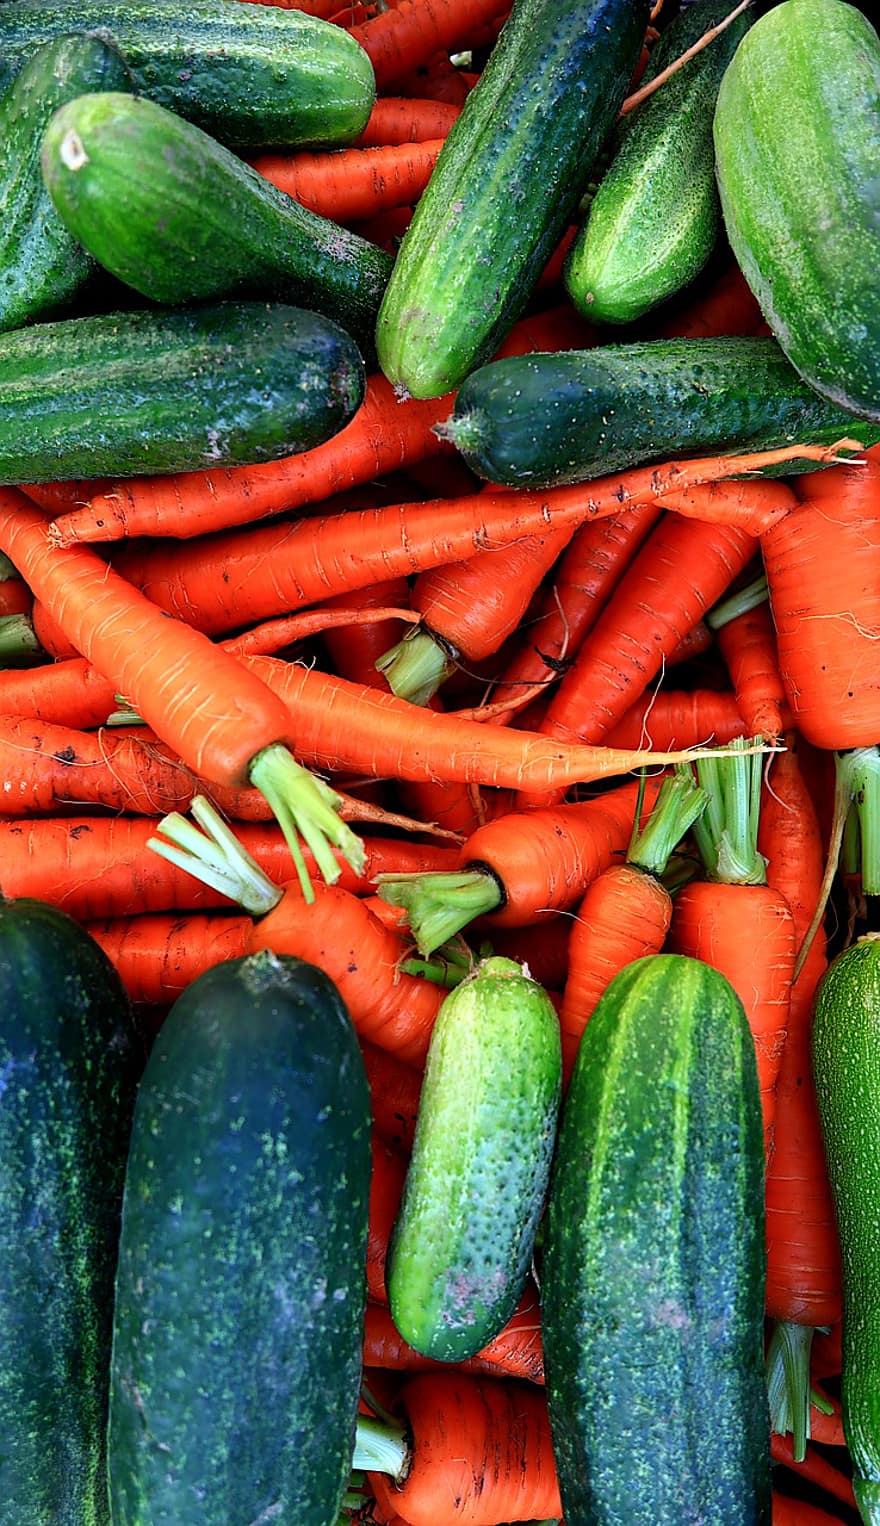 Vegetables, Cucumbers, Zucchini, Costs, Carrots, Agriculture, Health, Green, Nutrition, Bio, Eat